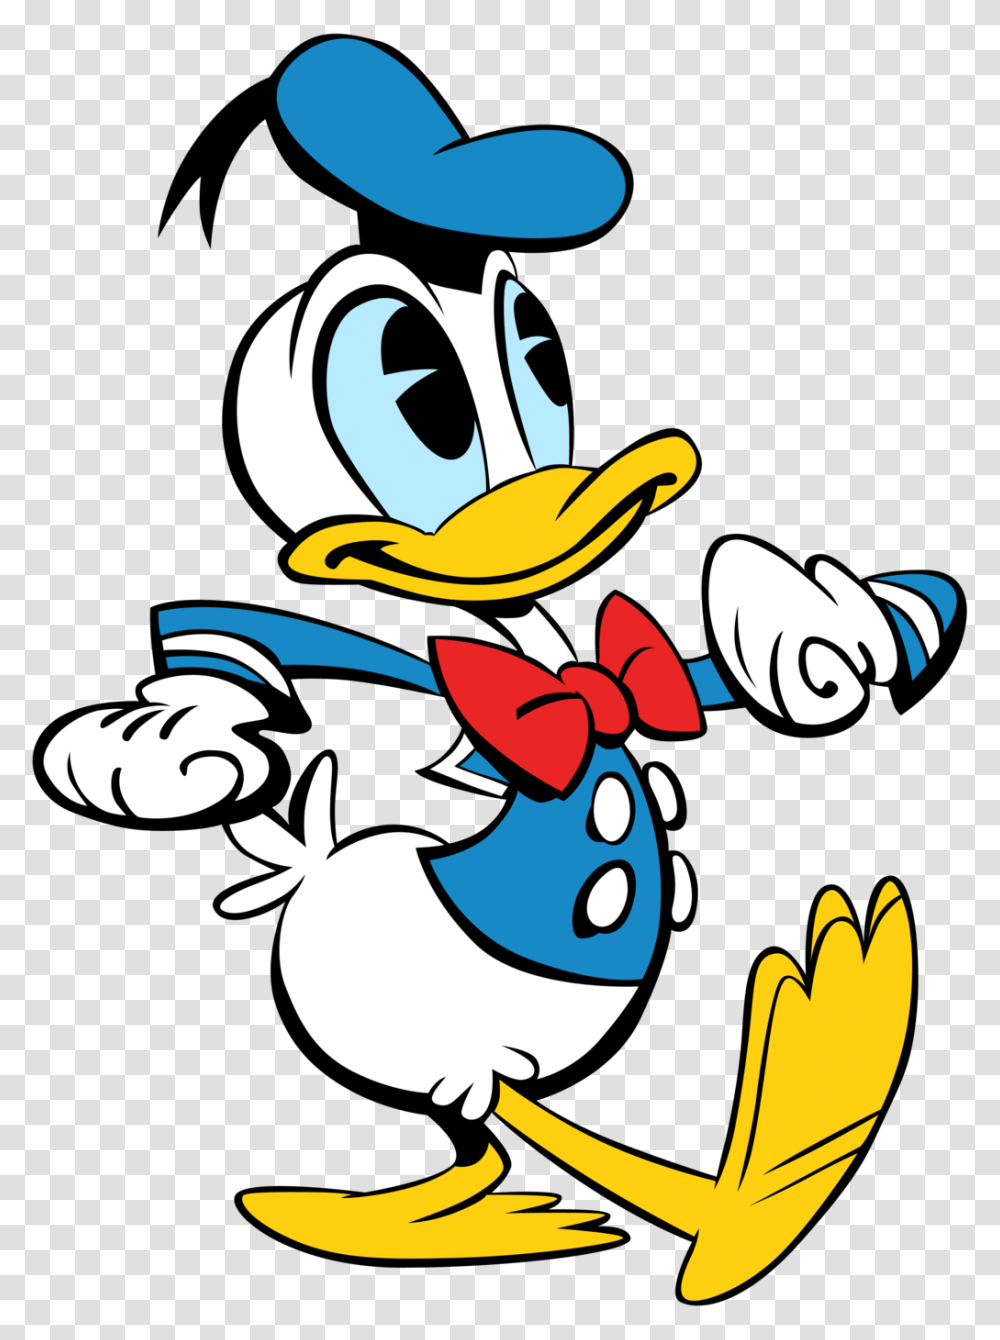 Donald Duck Image, Floral Design, Angry Birds Transparent Png